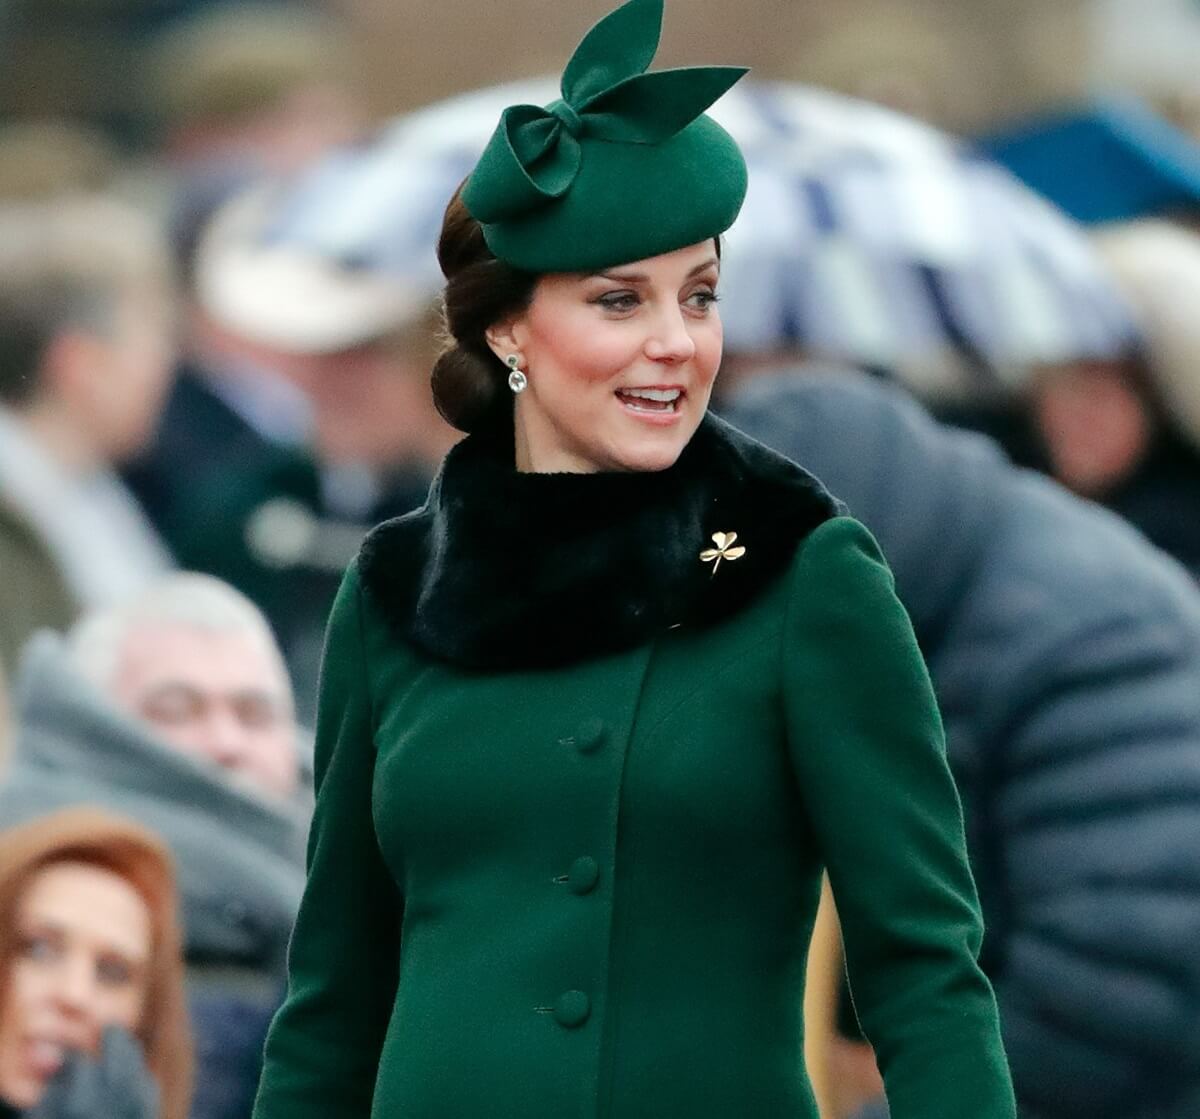 Kate Middleton attends the 2018 Irish Guards St Patrick's Day Parade